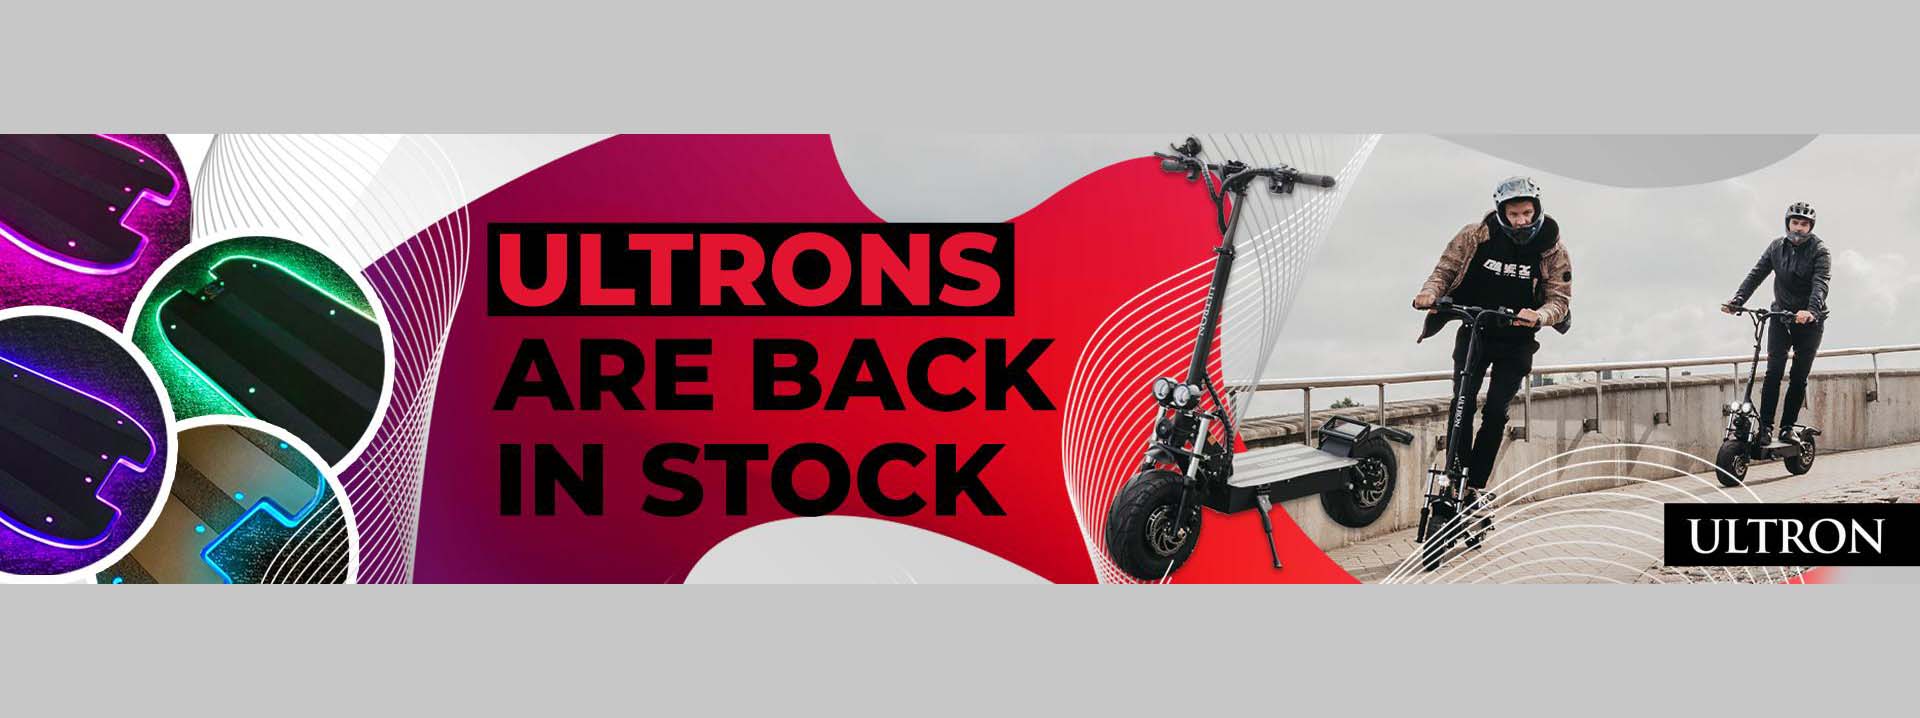 6)ULTRONS ARE BACK IN STOCK